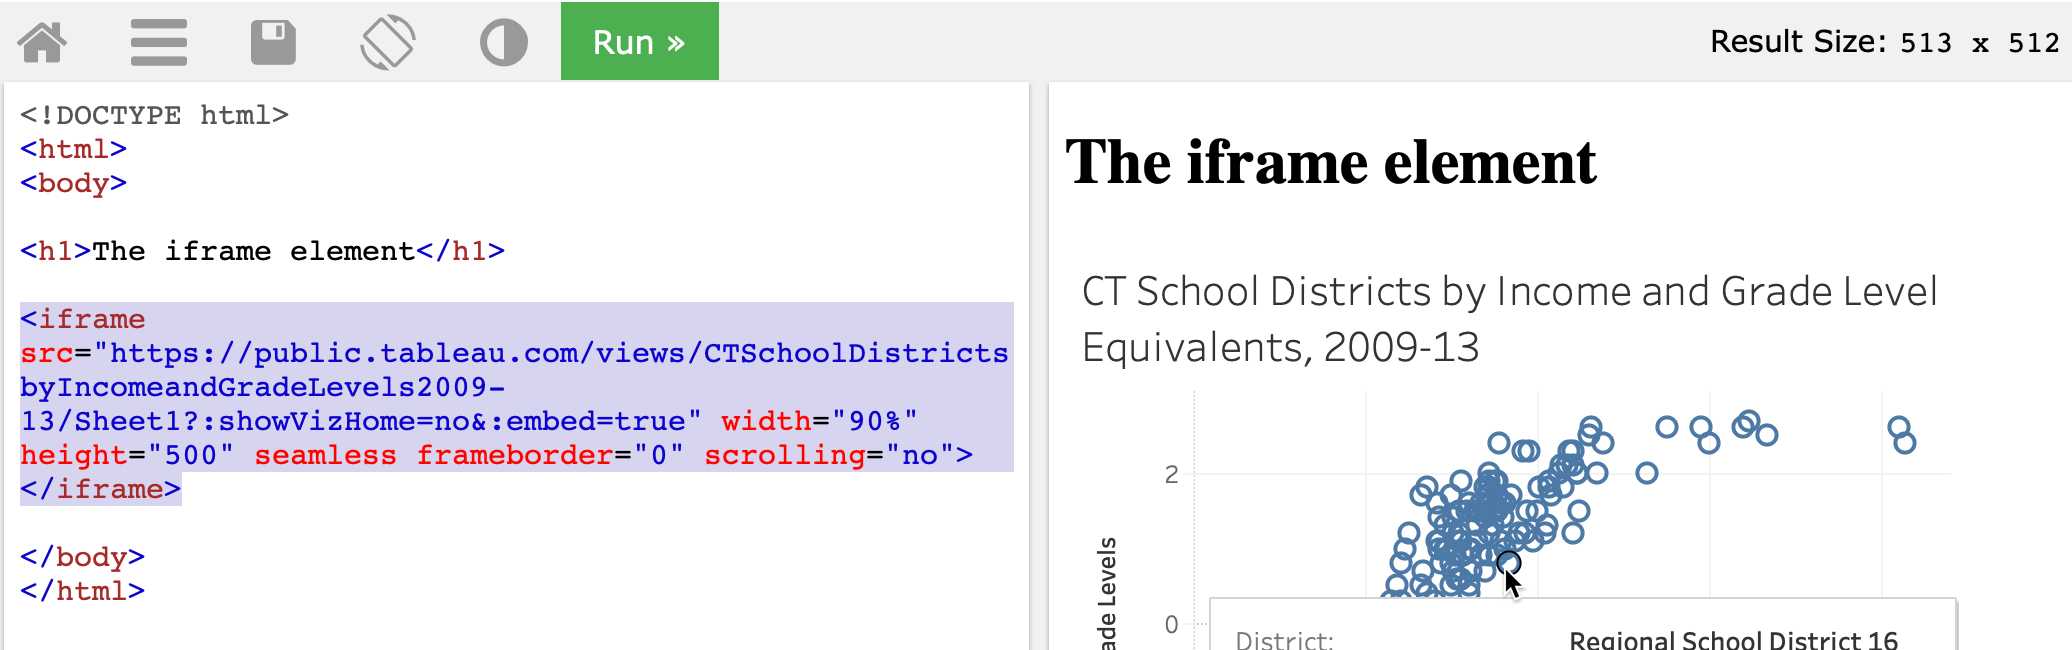 If a complex embed code does not work in your website, go back and copy the link to the visualization, and try to convert it into a simple iframe.